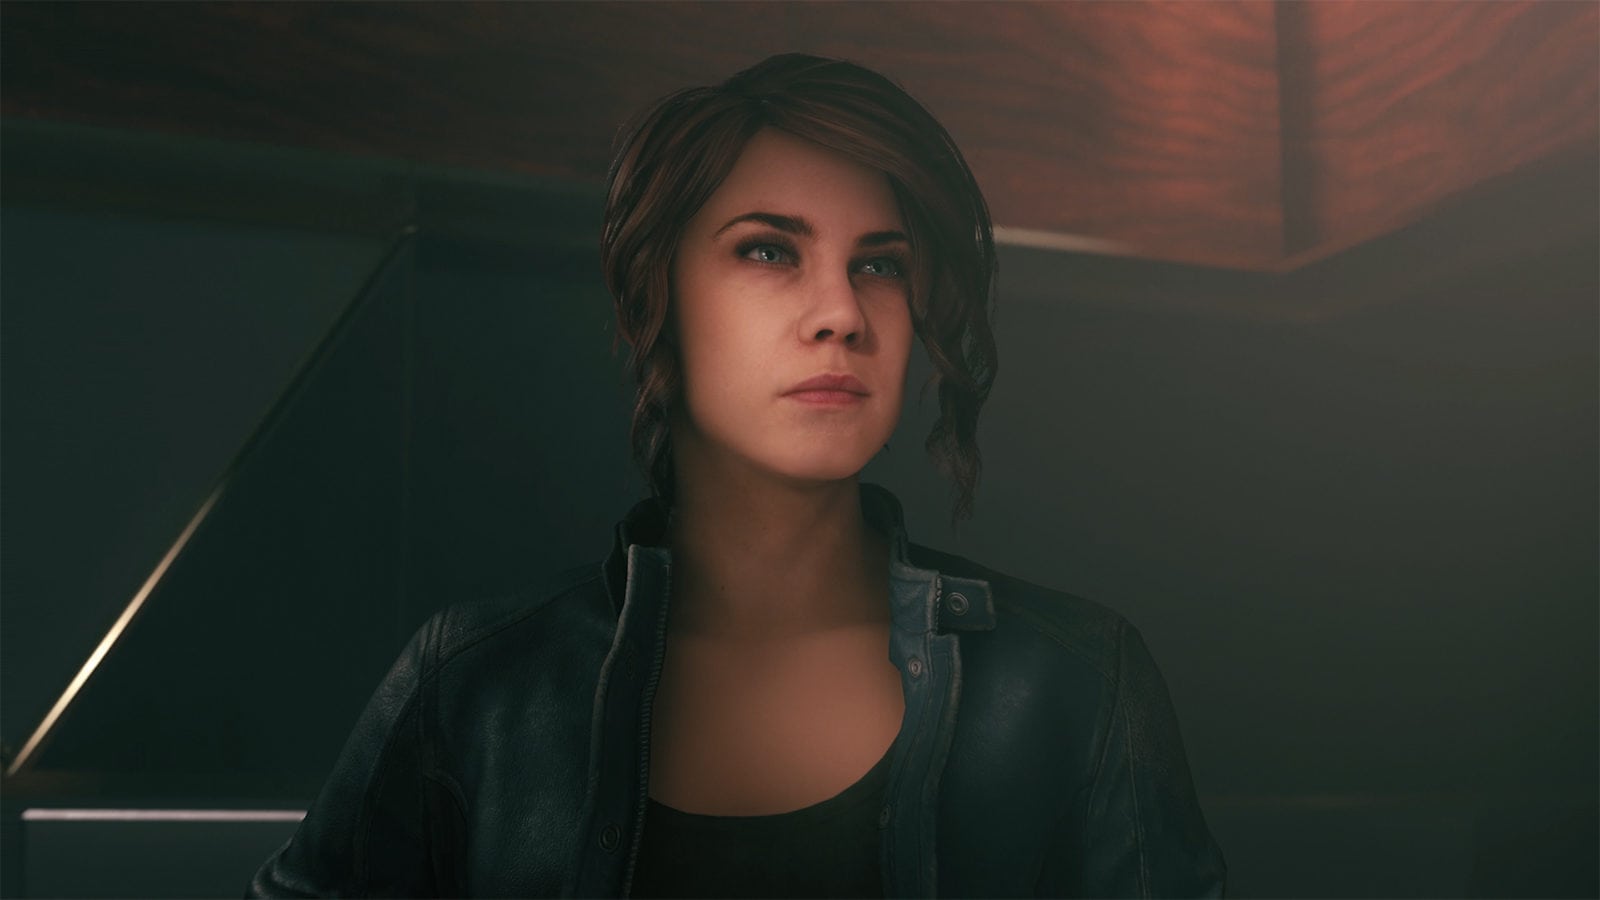 Control by Remedy Entertainment launches this Summer